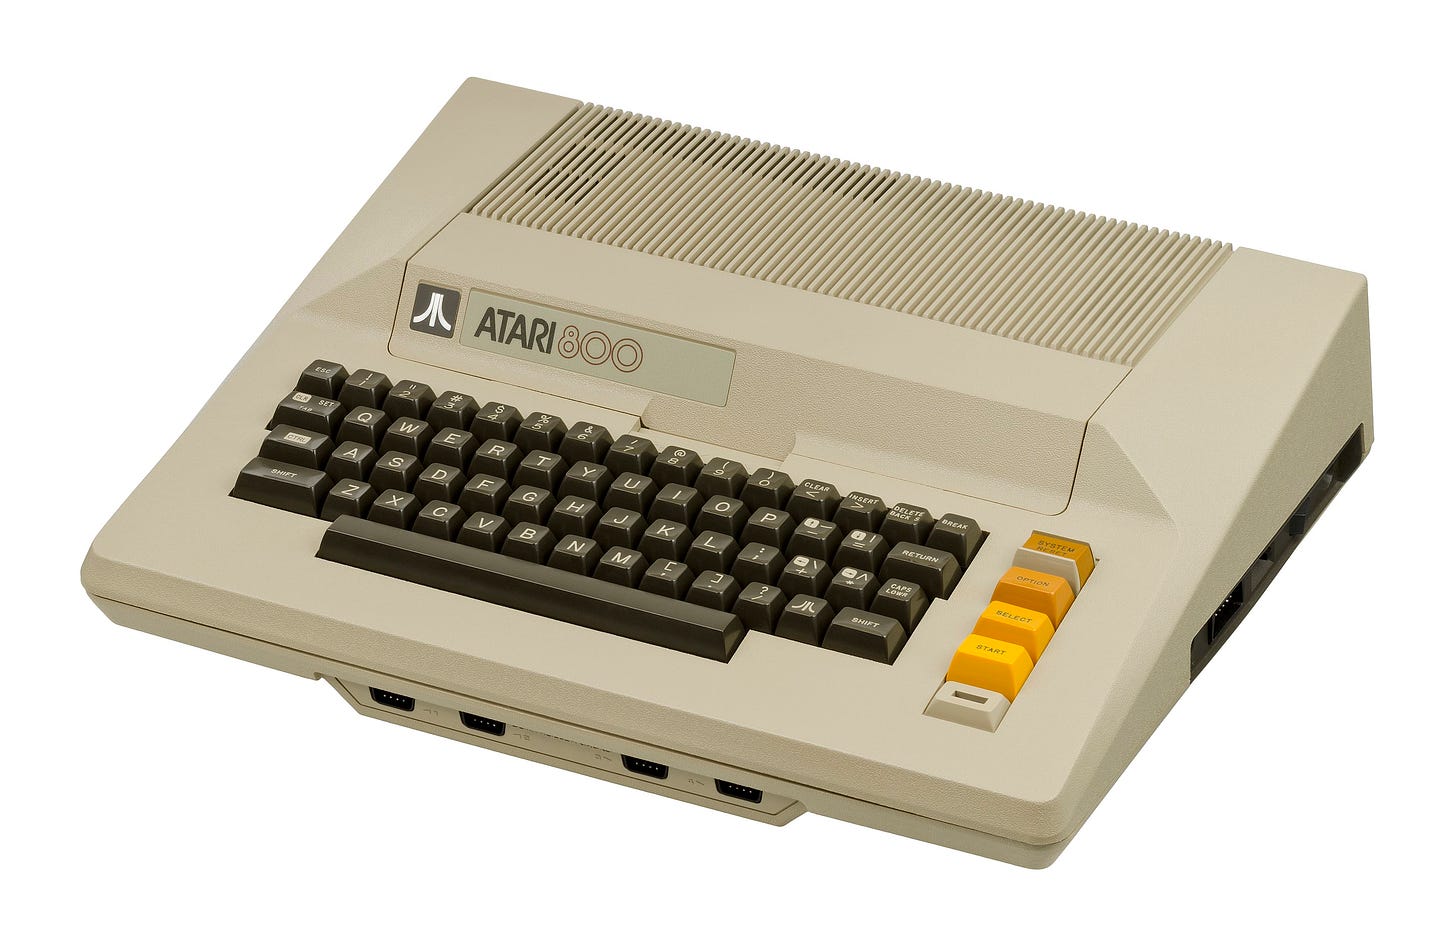 undefinedThe Atari 800, an 8-bit computer released by Atari in 1979. Based off the MOS 6502 microprocessor and custom video and sound processors, the Atari 800 was the first in a line of popular home computers. Later models include the 600XL, 800XL 65XE and 130XE, which featured various amounts of memory and expansion capability.